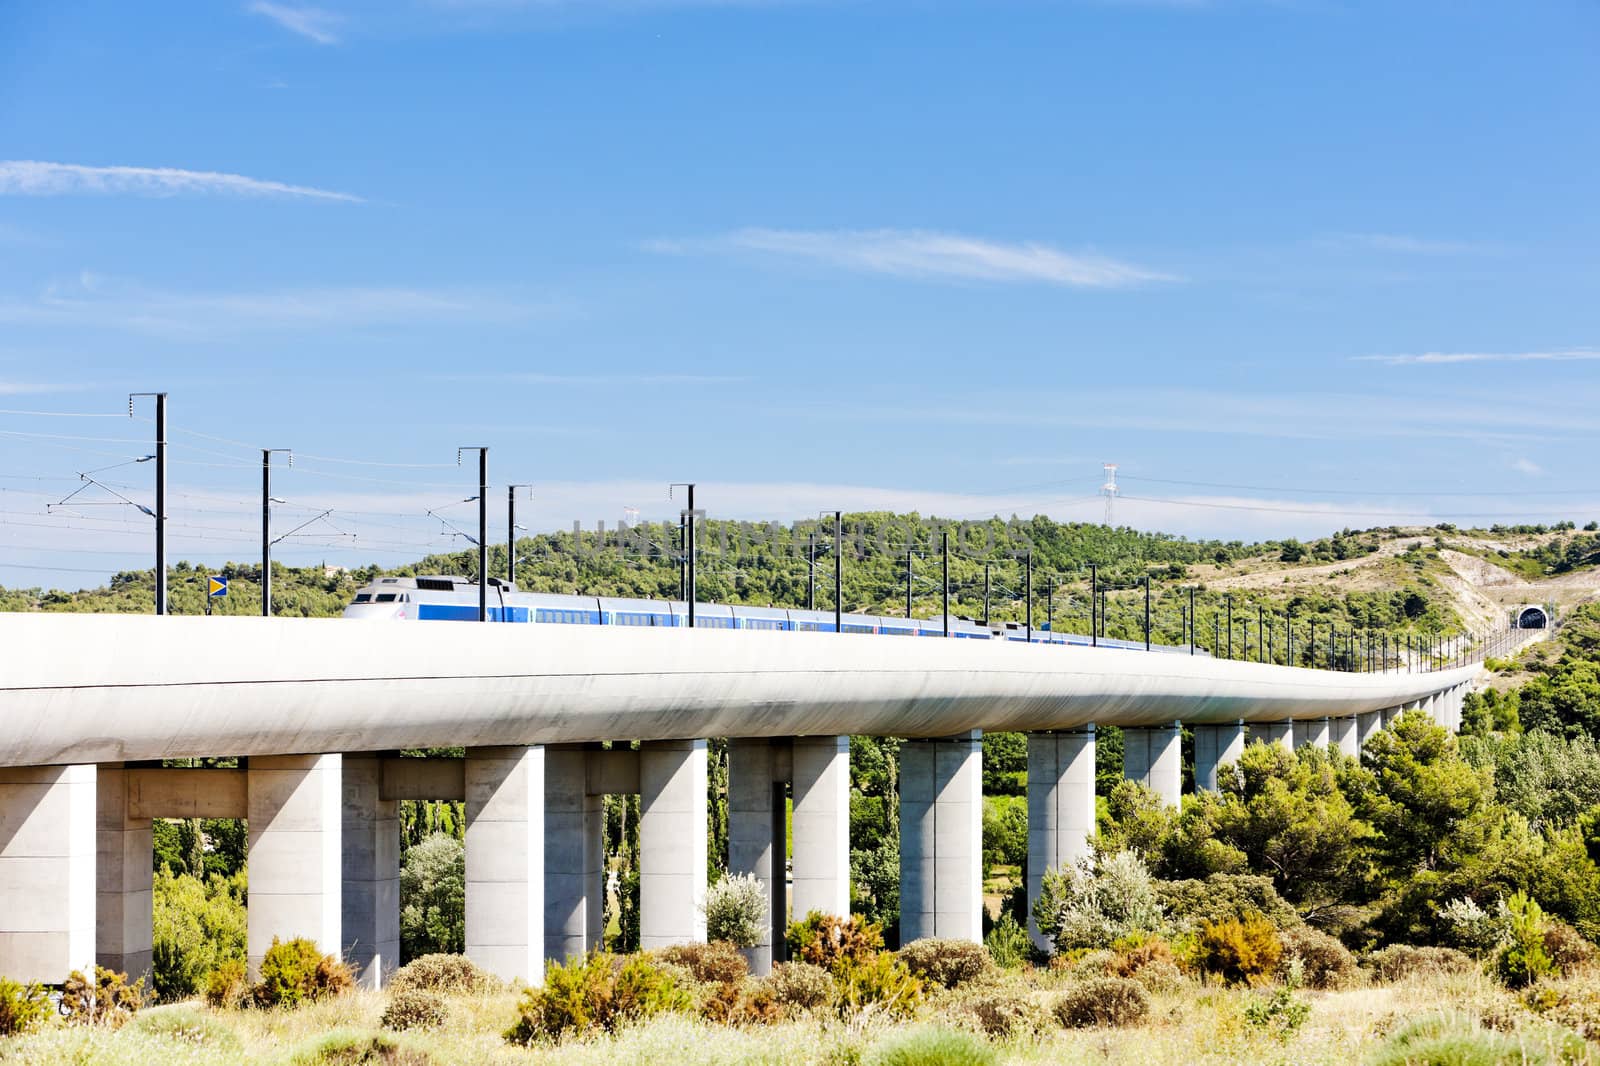 train of TGV on railway viaduct near Vernegues, Provence, France by phbcz